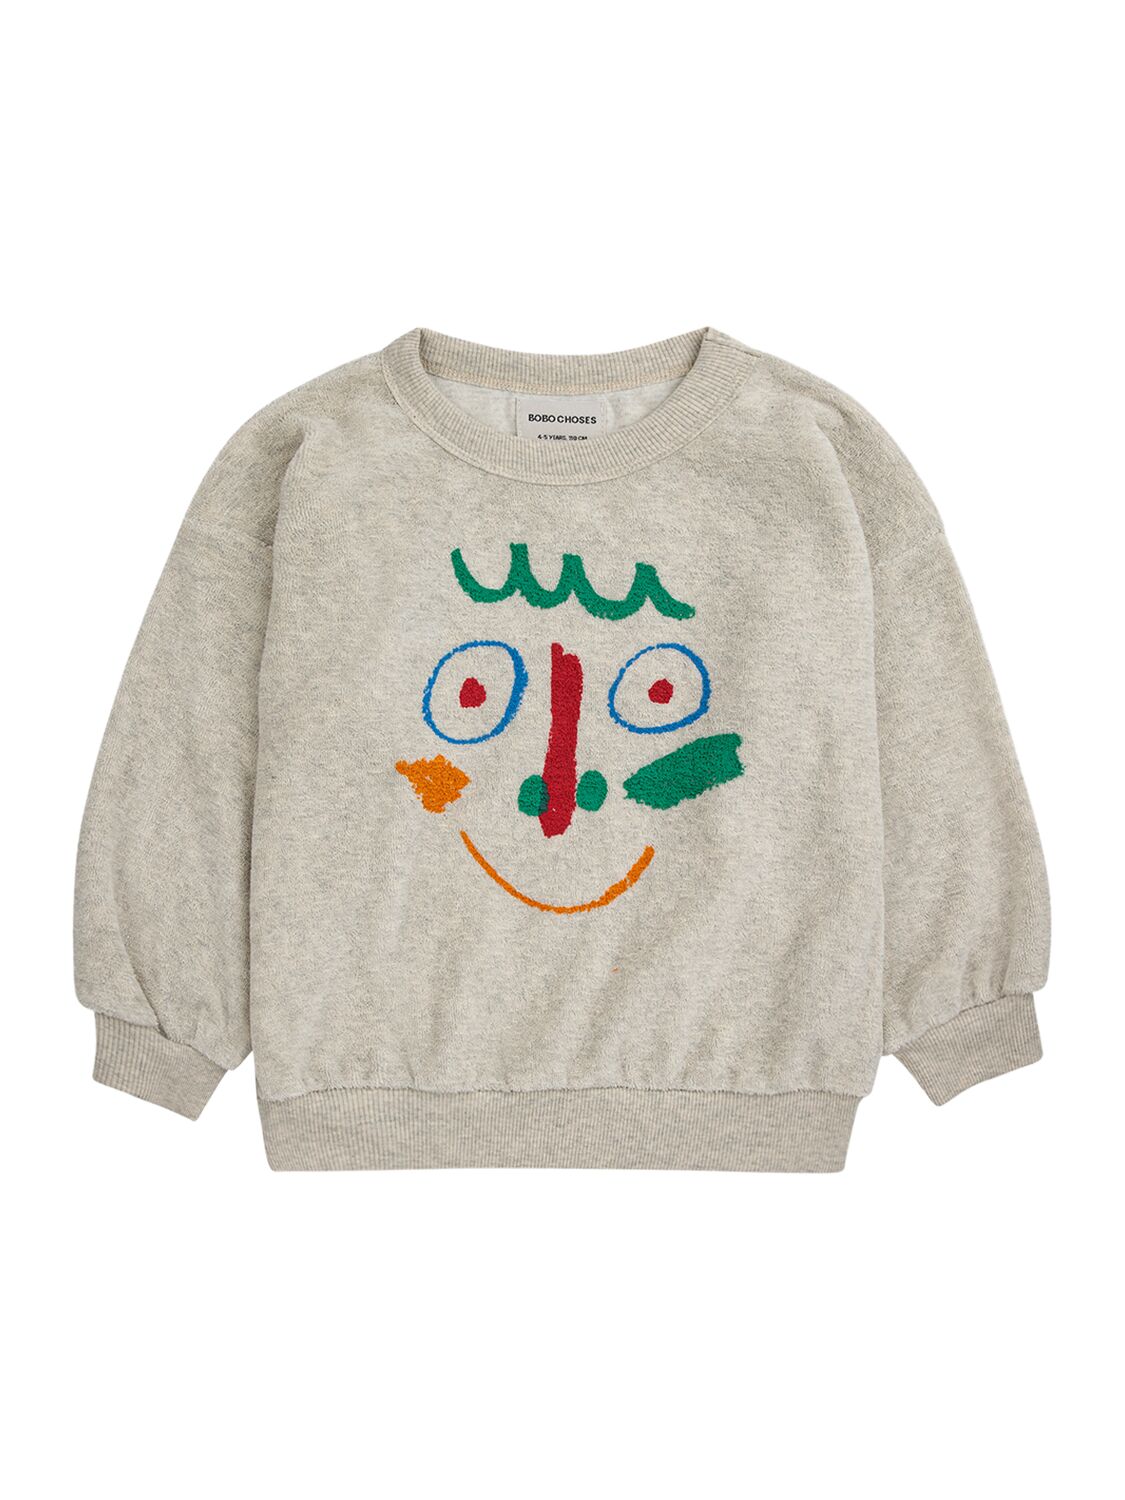 Bobo Choses Grey Sweatshirt For Kids With Multicolored Face Pattern In Grey